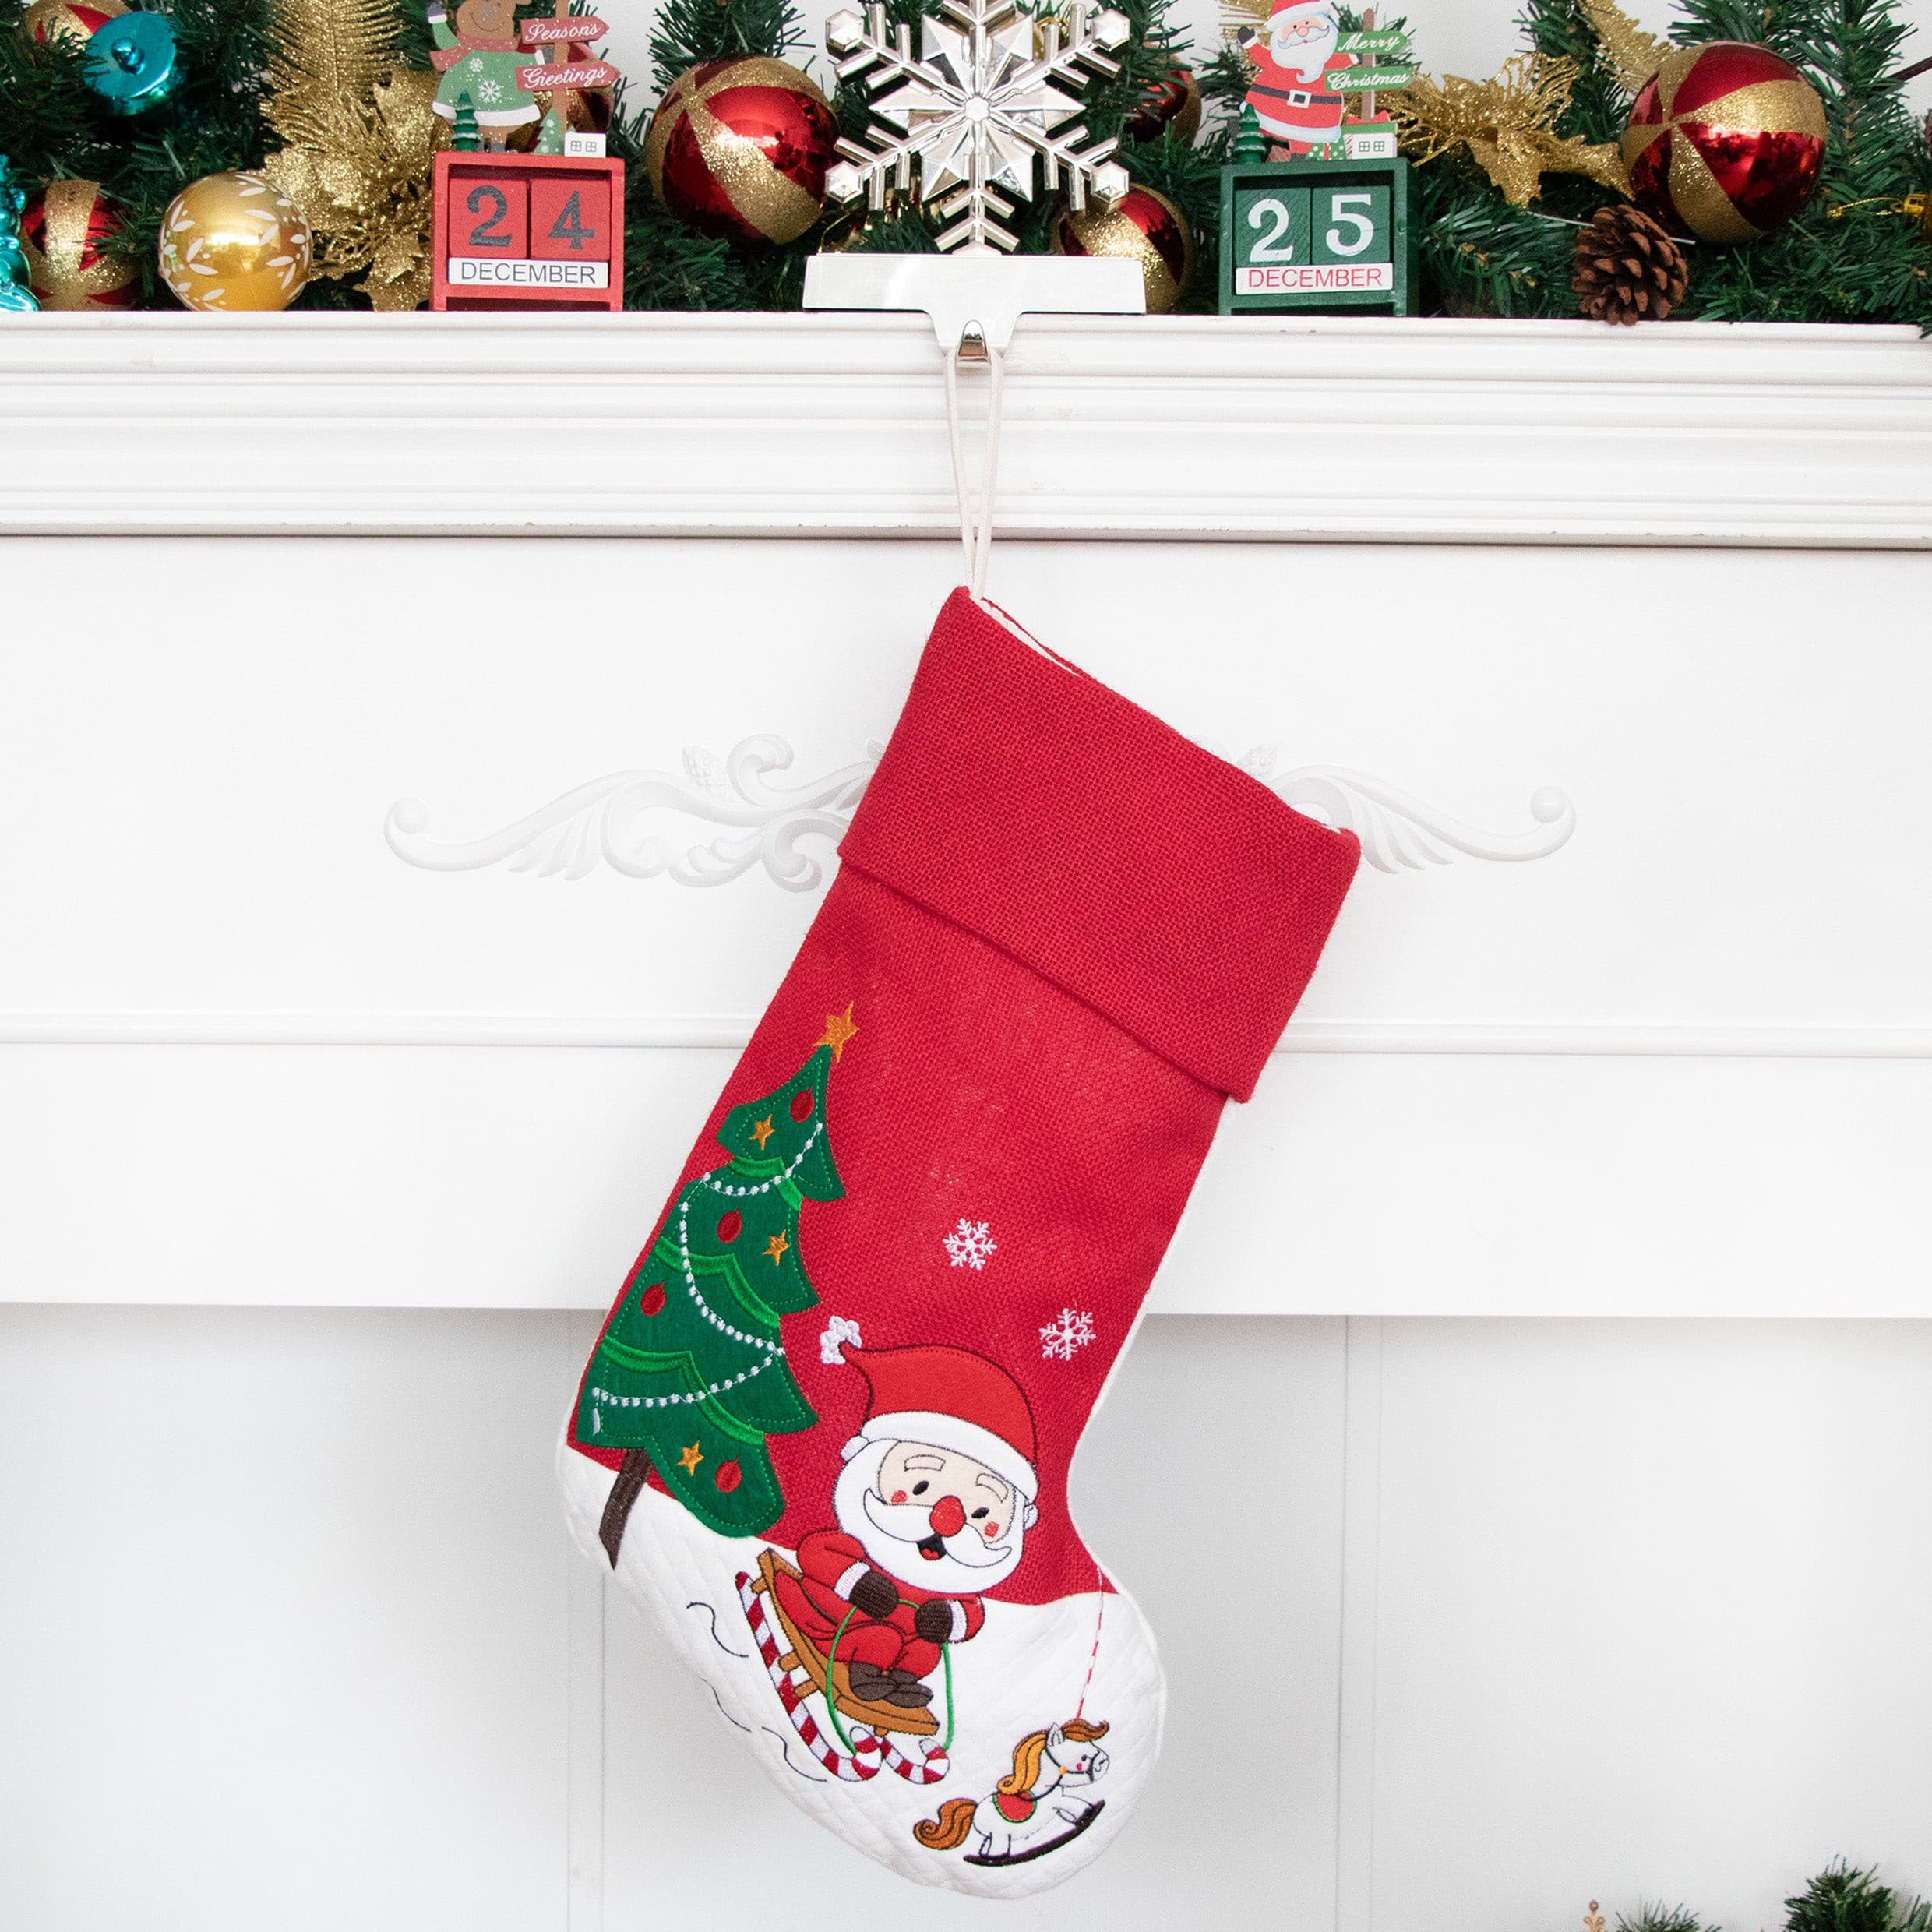 Burlap Personalized Santa Christmas Stocking Rustic Applique Stockings with Embroidered Cartoon -PJ107.